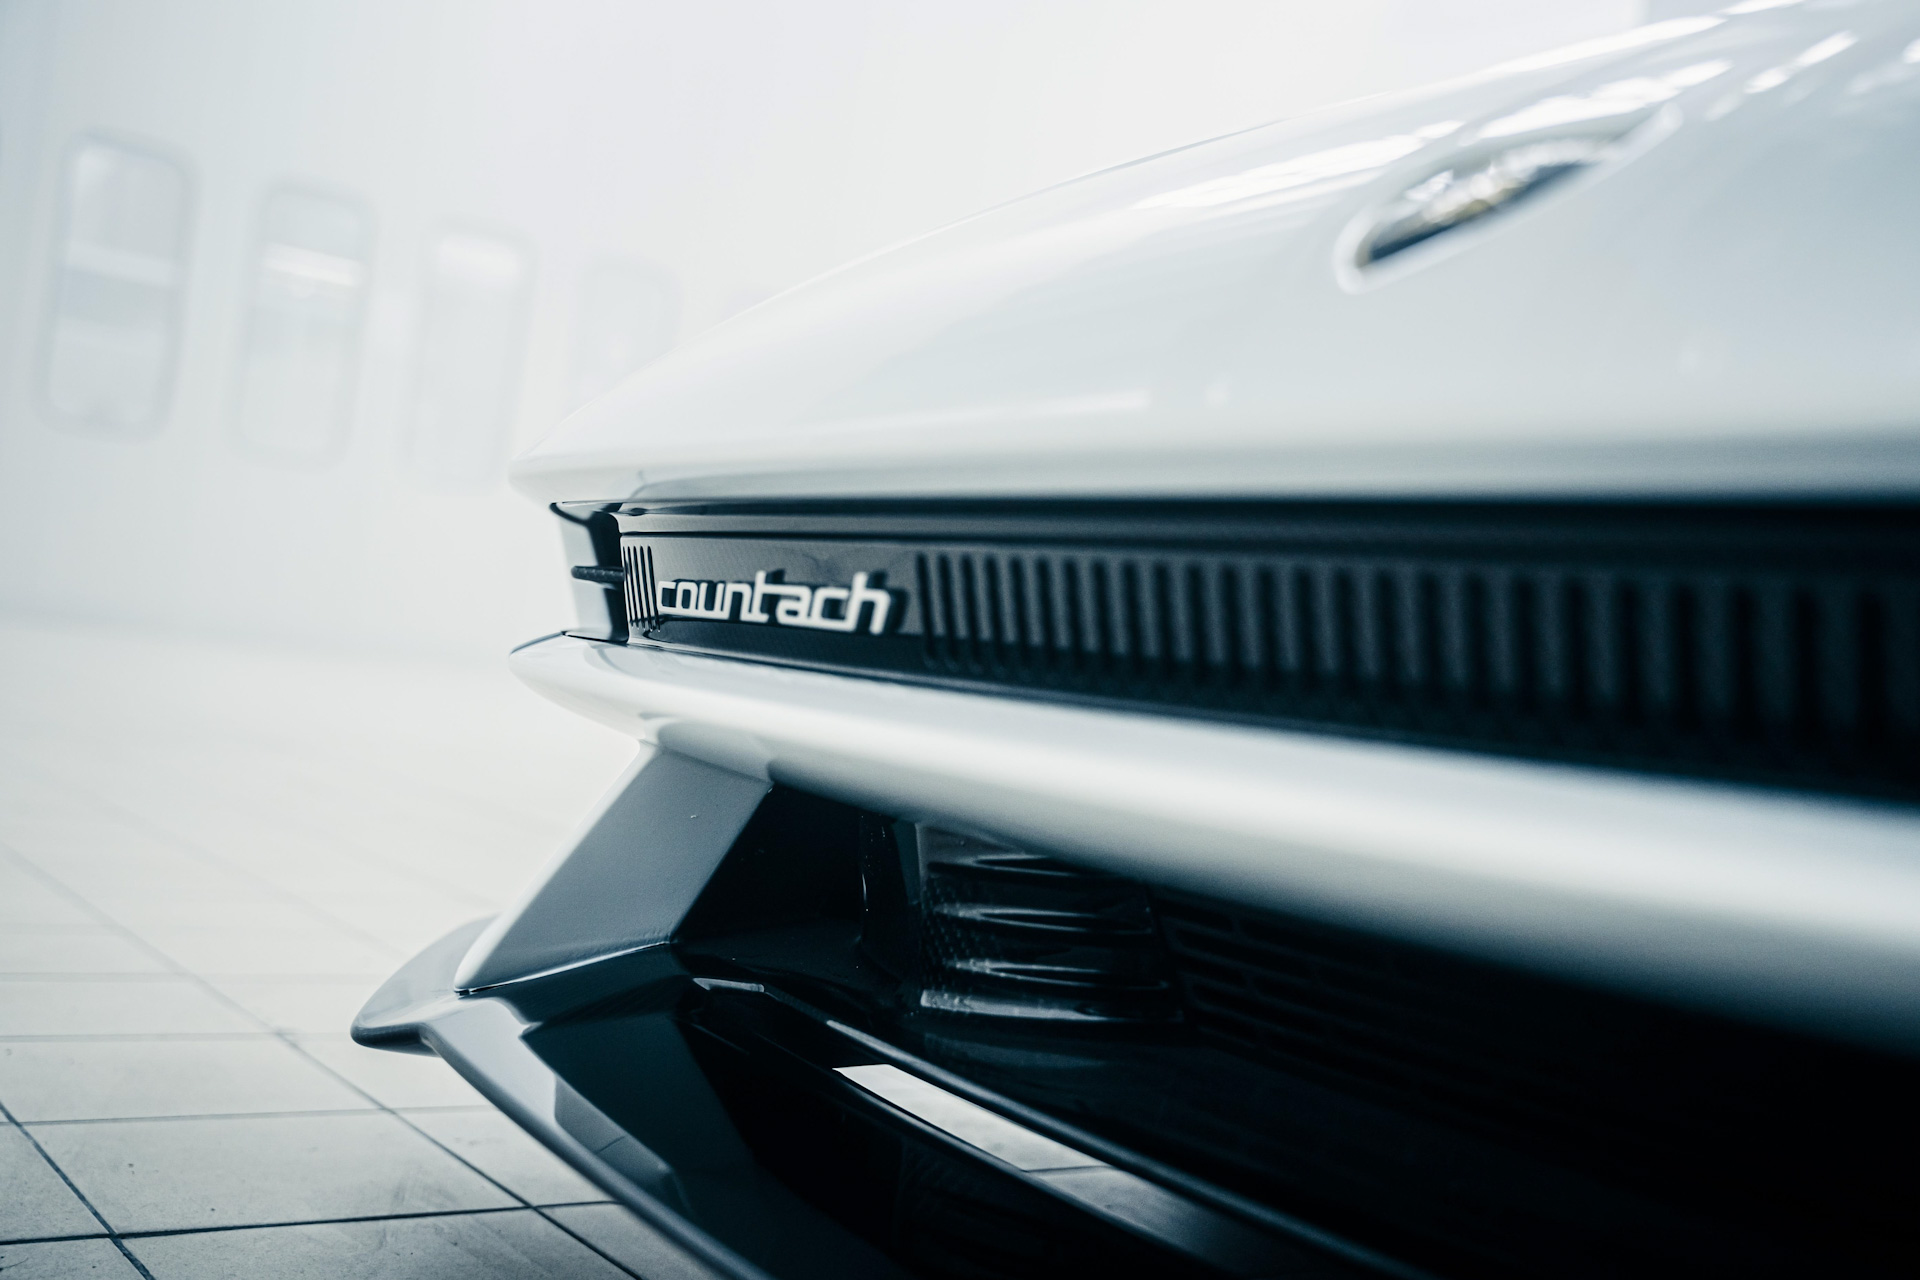 Close up of Lamborghini Countach 2022 front with focus on countach badge